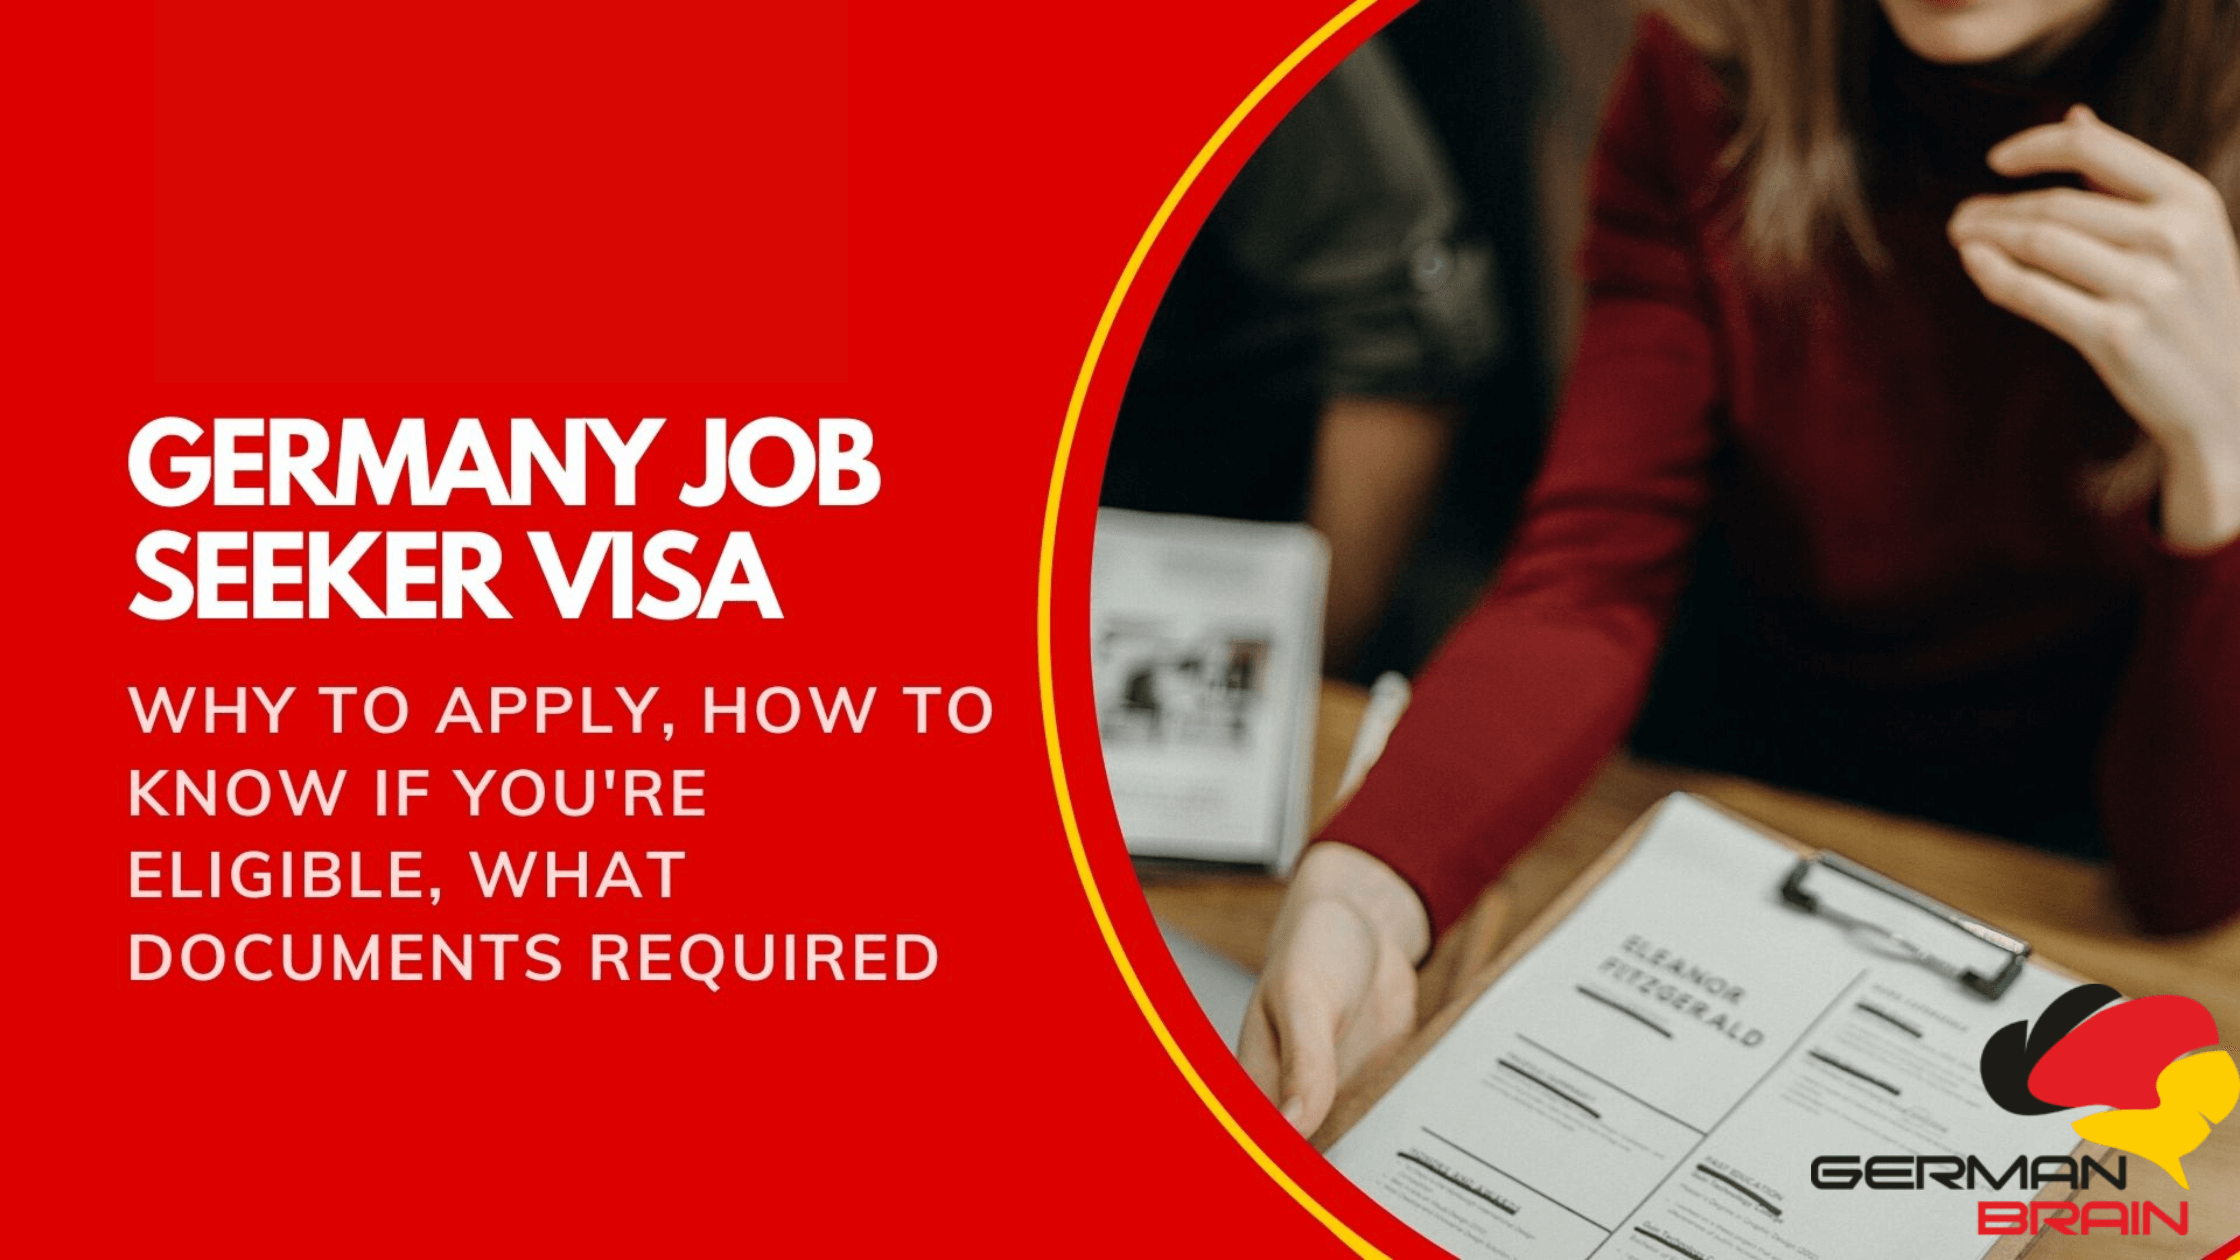 Germany Job Seeker Visa Information and Application Process in 2020